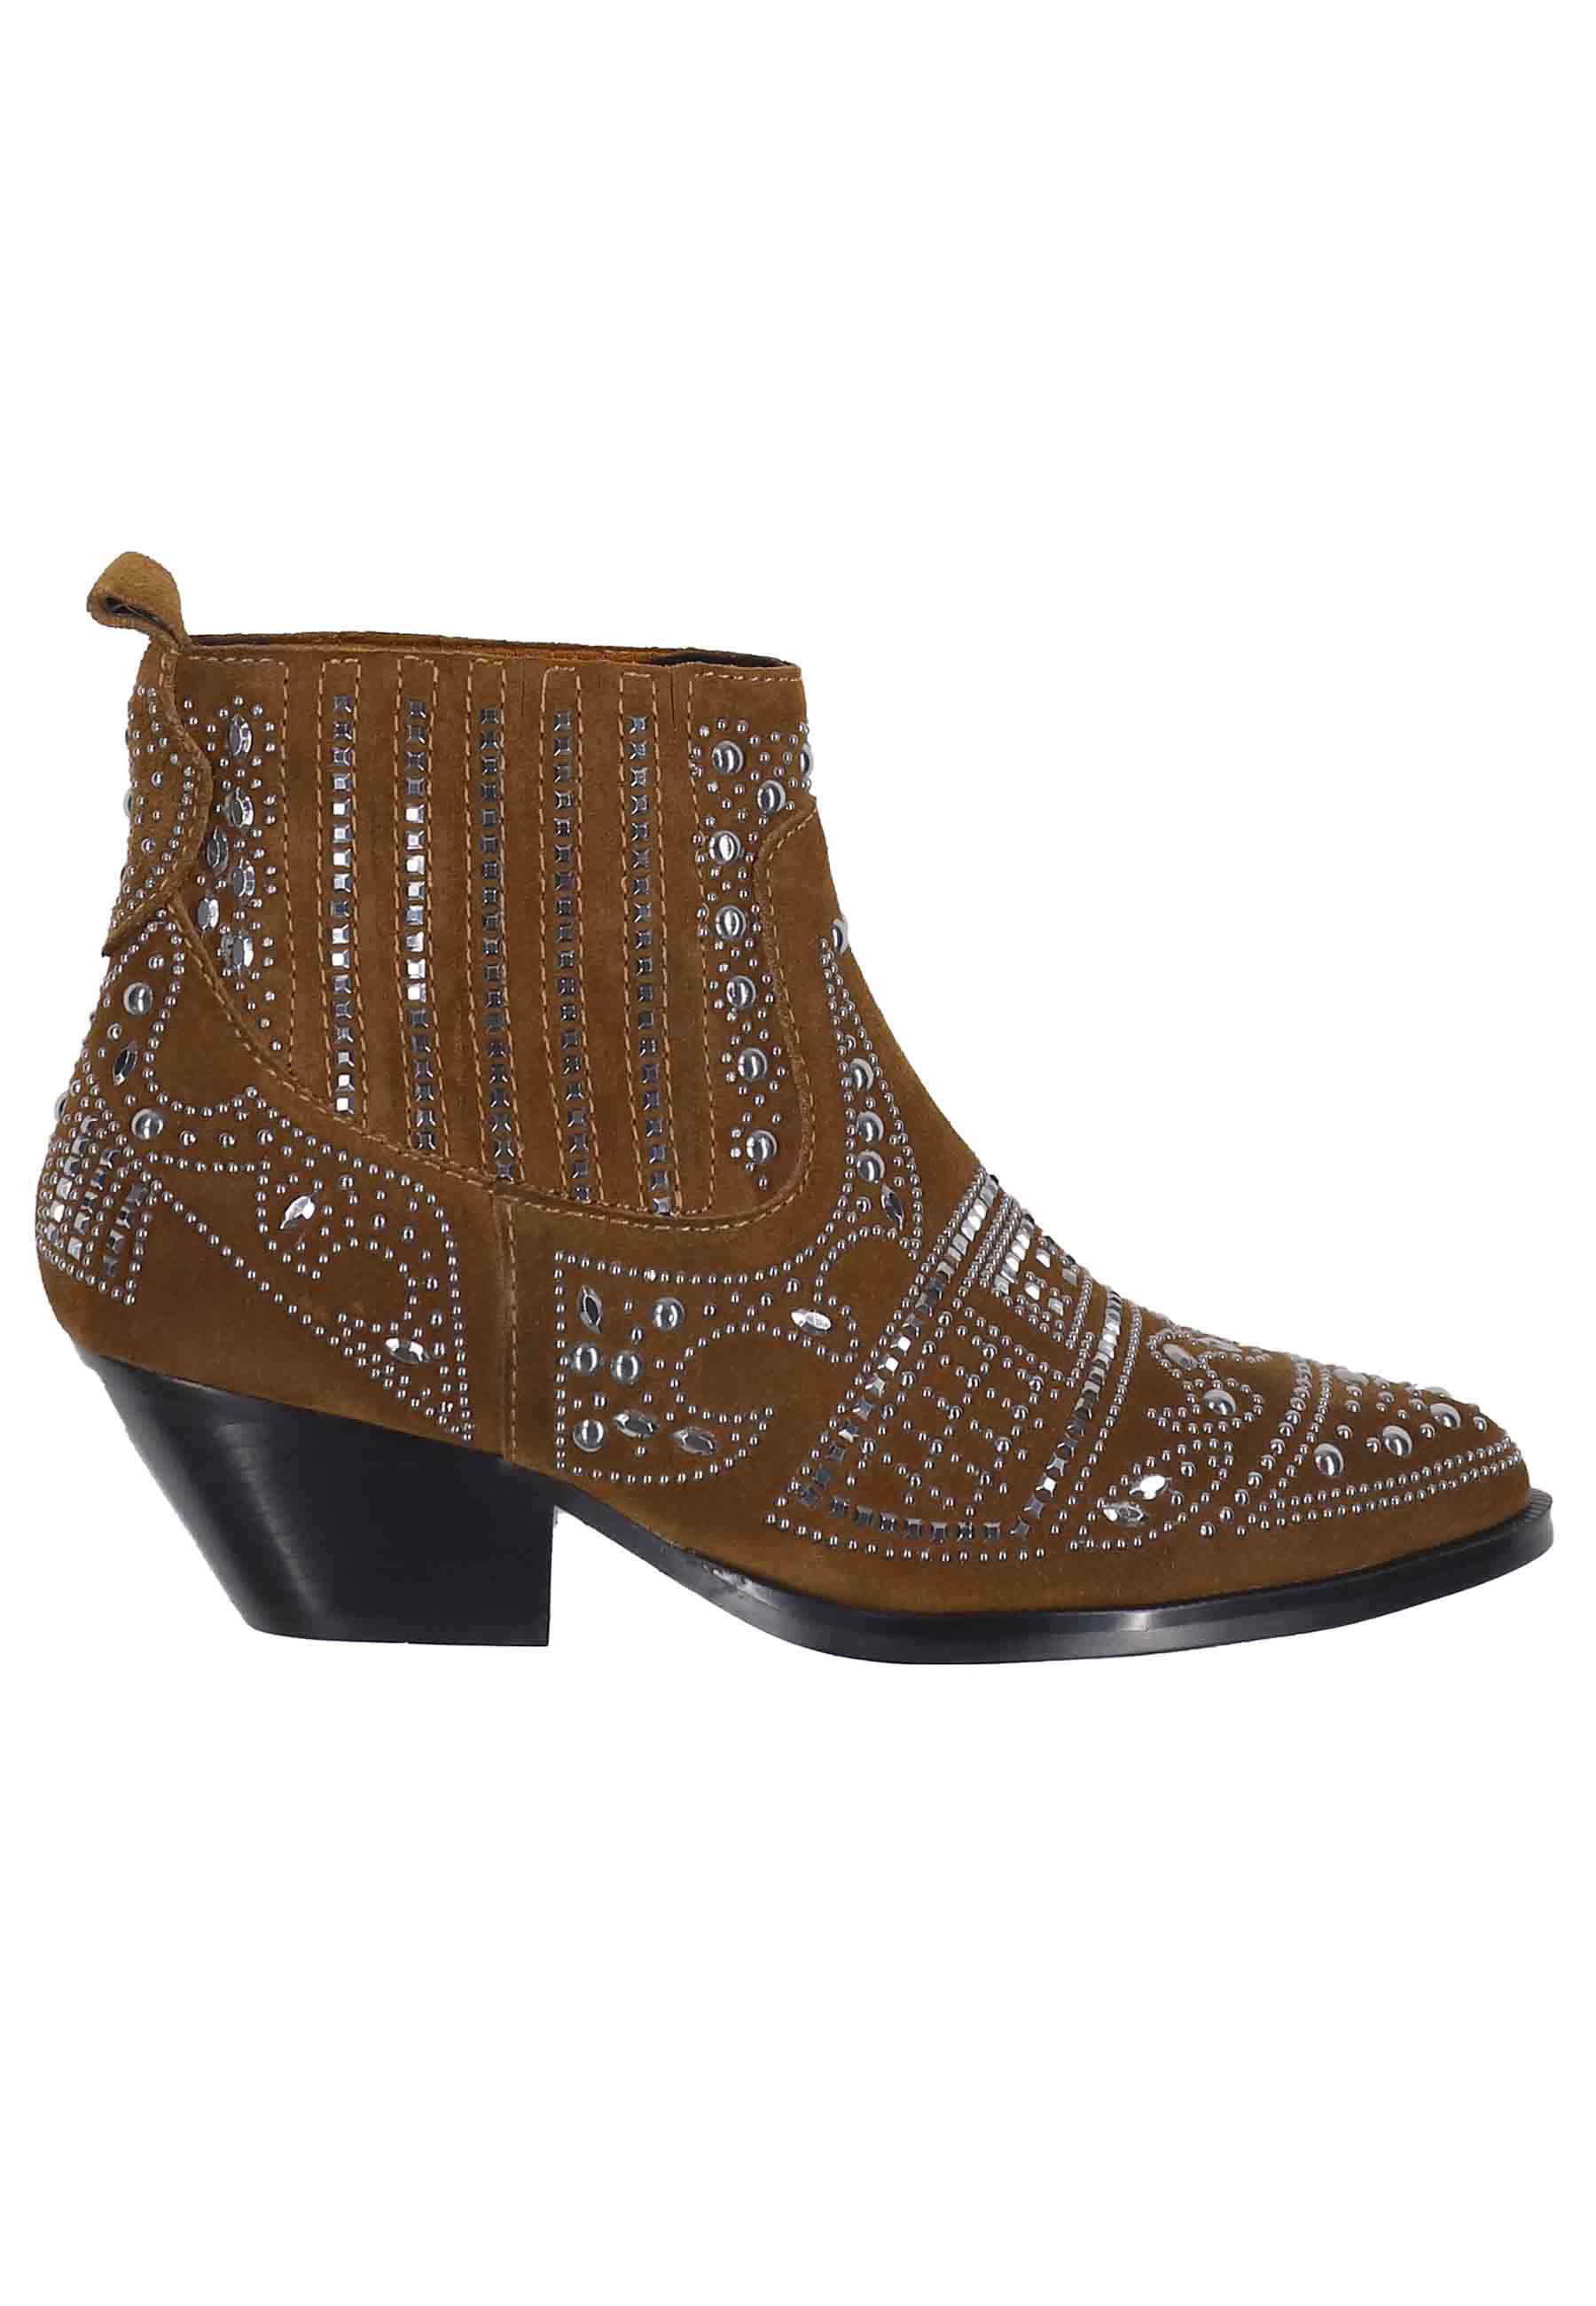 Women's Texan ankle boots in leather suede with studs and low Soho heels